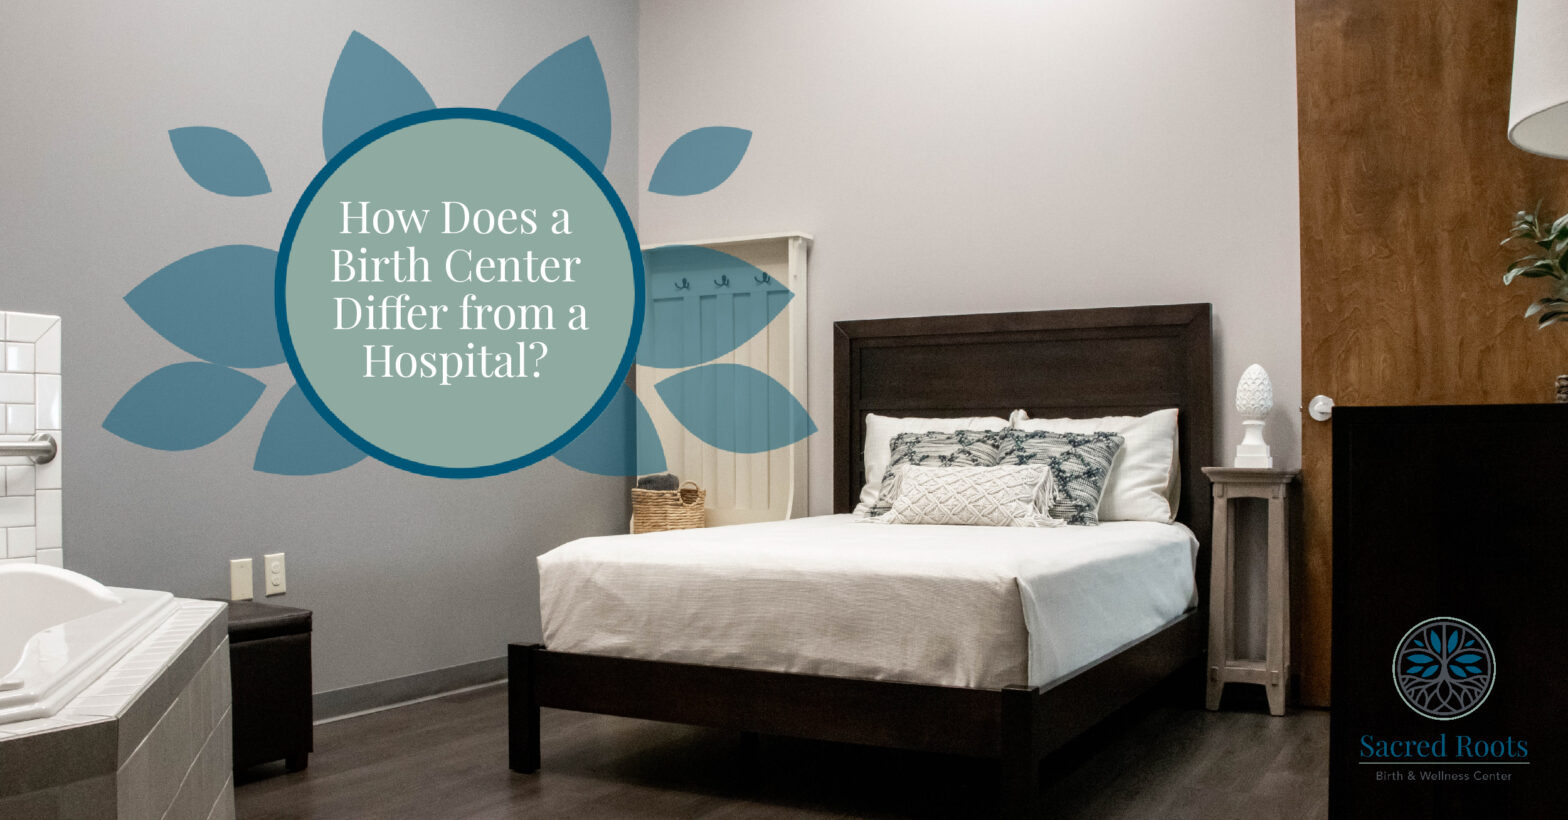 How Does a Birth Center Differ from a Hospital?